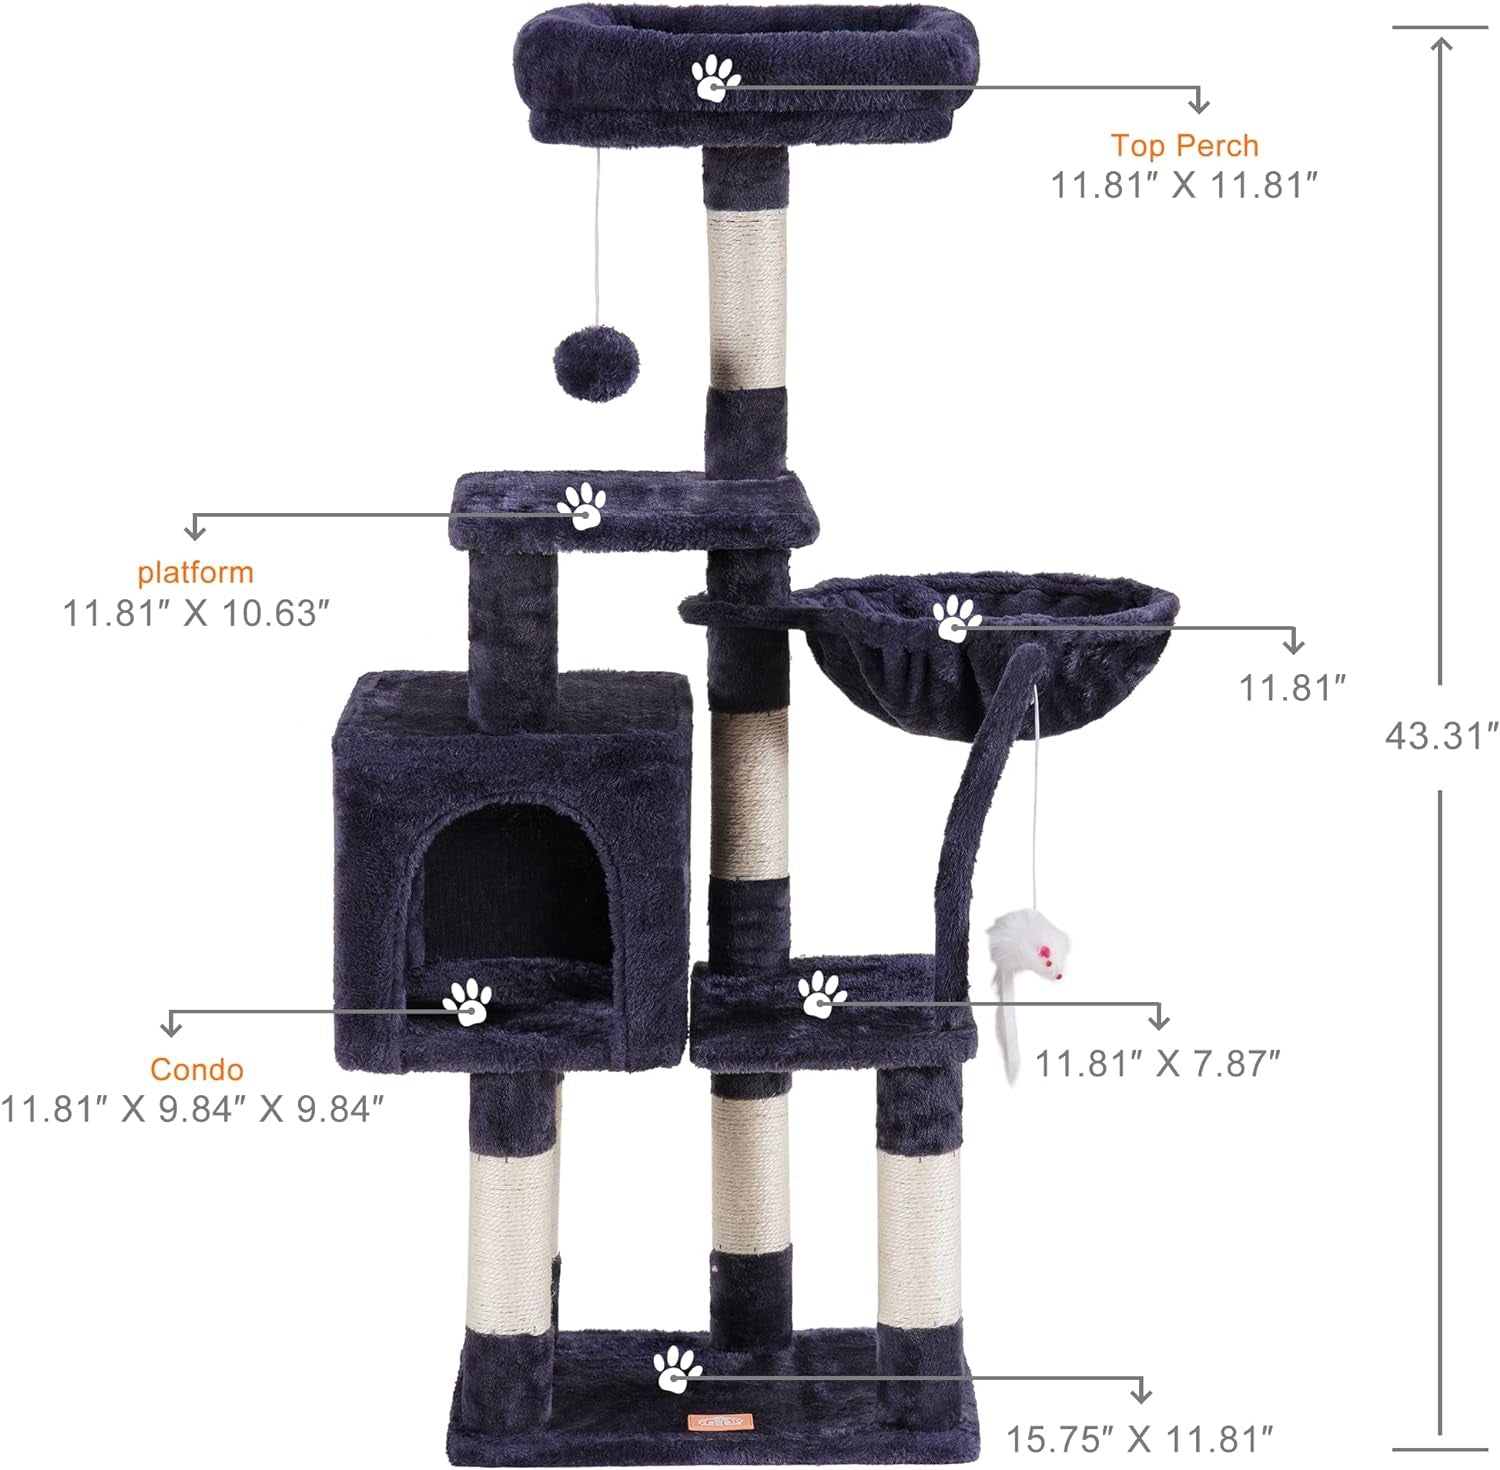 Cat Tree with Toy, Cat Tower Condo for Indoor Cats, Cat House with Padded Plush Perch, Cozy Hammock and Sisal Scratching Posts, Smoky Gray HCT004SG